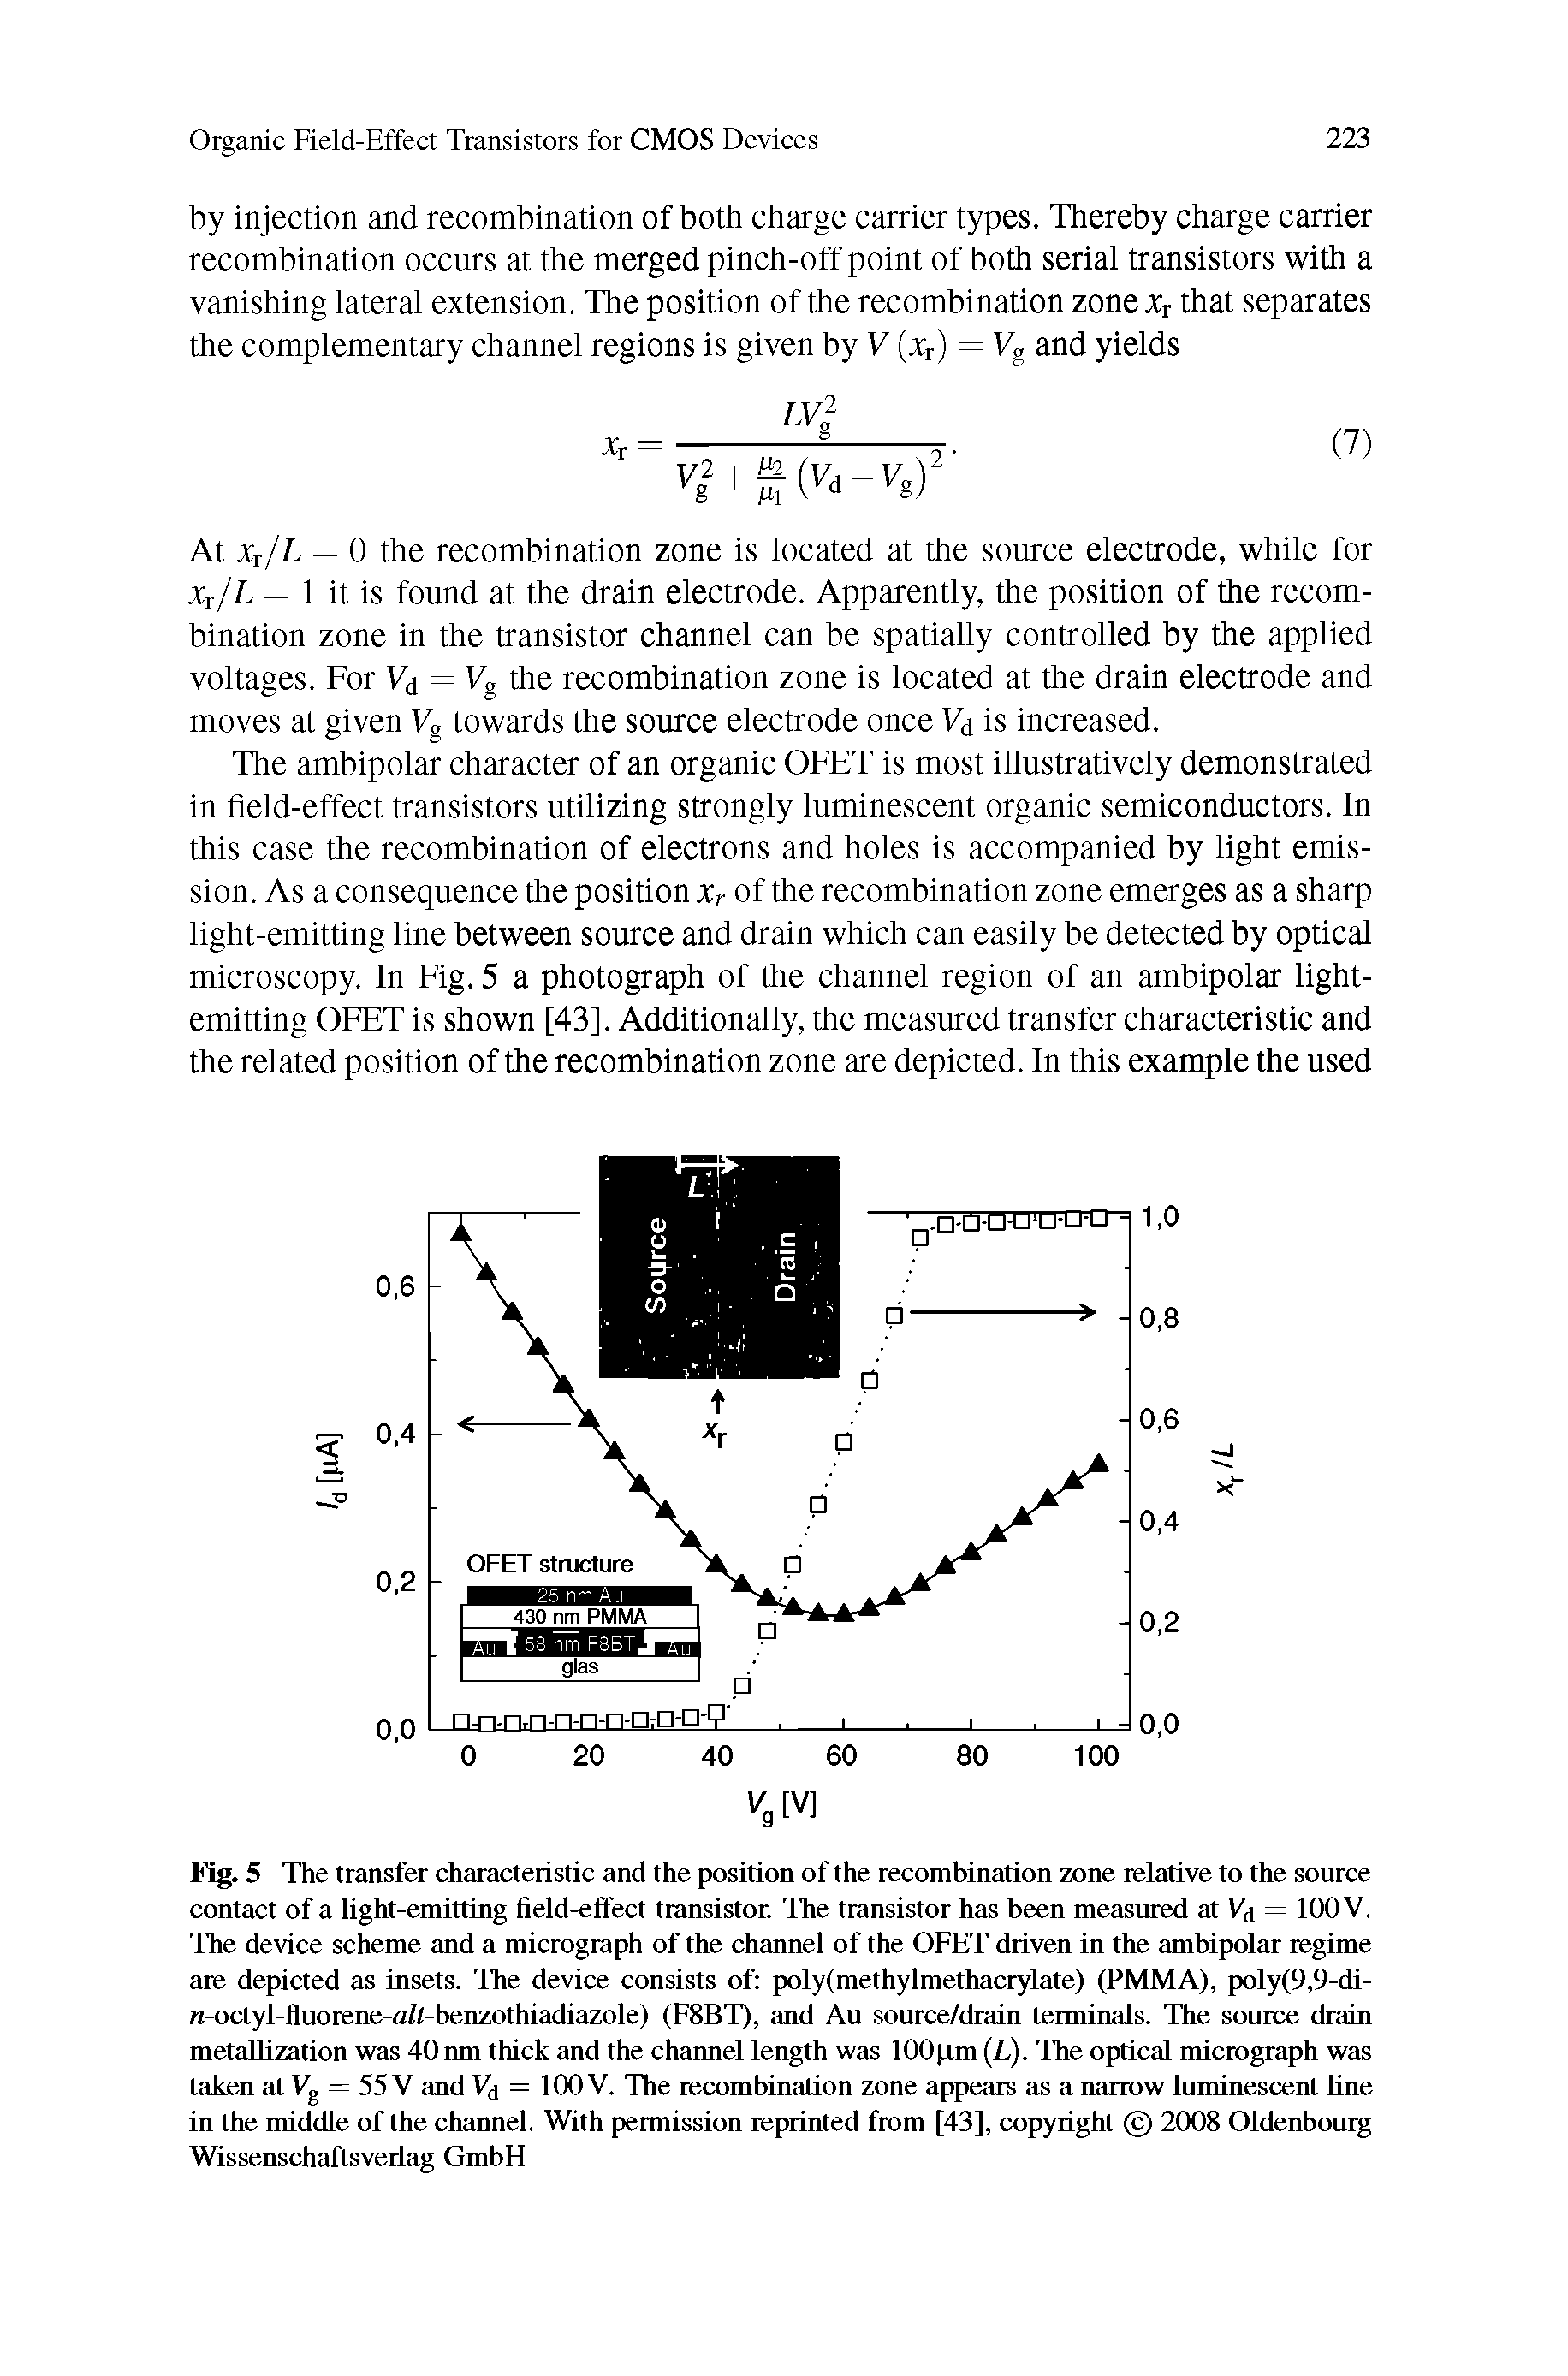 Fig. 5 The tiansfer characteristic and the position of the recombination zone relative to the source contact of a light-emitting field-effect transistor. The transistor has been measured at Vd = 100 V. The device scheme and a micrograph of the channel of the OFET driven in the ambipolar regime are depicted as insets. The device consists of poly(methylmethacrylate) (PMMA), poly(9,9-di-n-octyl-fluorene-a/t-benzothiadiazole) (F8BT), and Au source/drain terminals. The source drain metallization was 40 nm thick and the channel length was lOOpm (L). The optical micrograph was taken at Vg = 55 V and Vd = 100 V. The recombination zone appears as a narrow luminescent line in the middle of the channel. With peimission reprinted from [43], copyright 2008 Oldenbouig Wissenschaftsverlag GmbH...